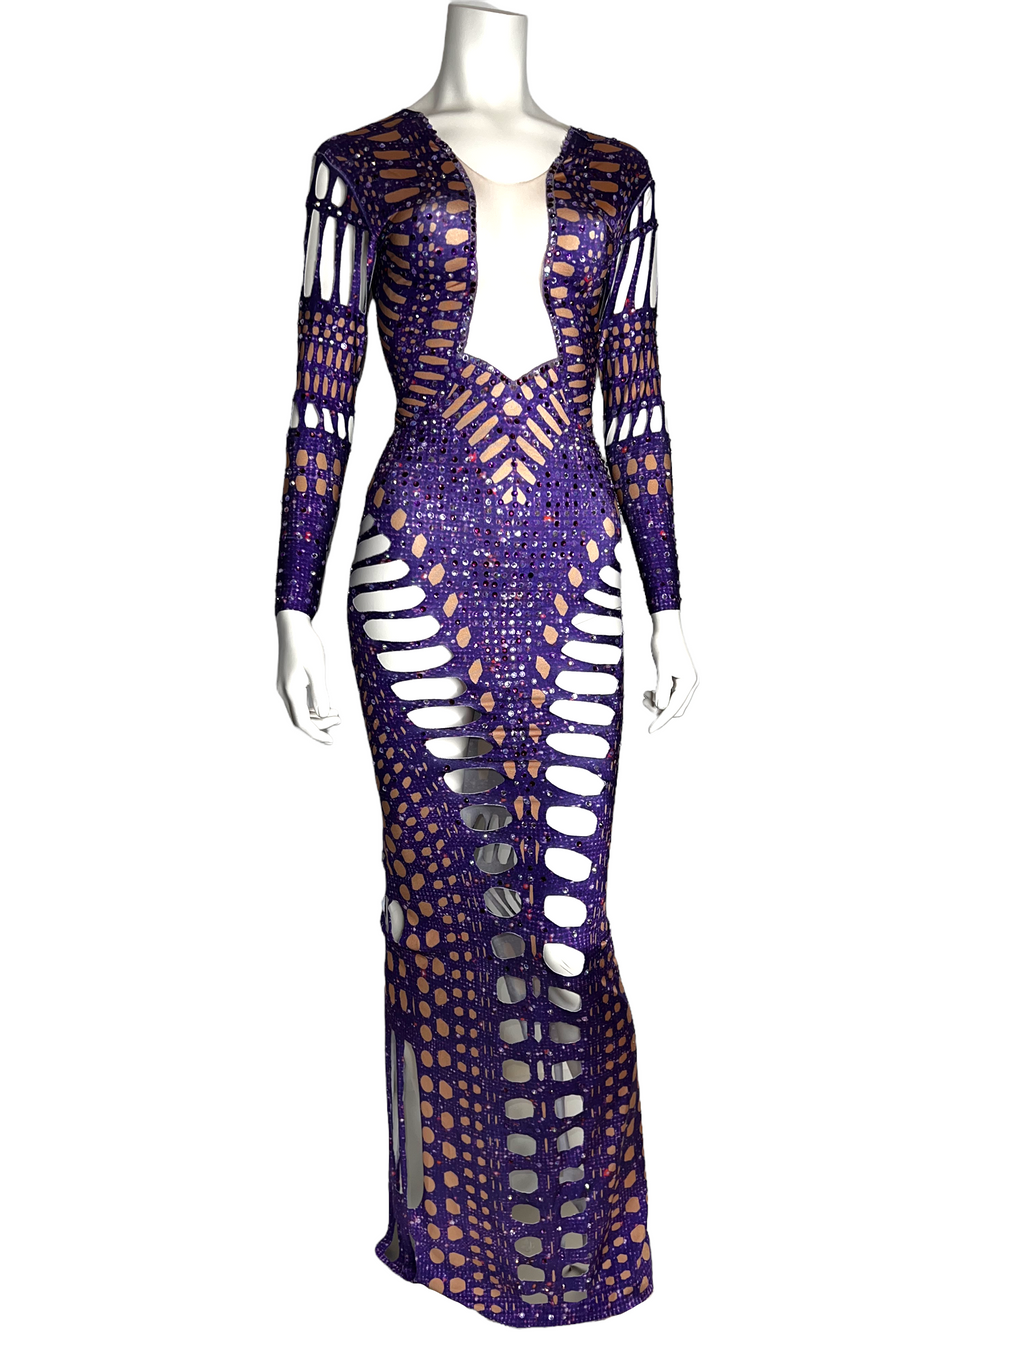 "Royal Pearlesque Crystal Cut Out Dress"